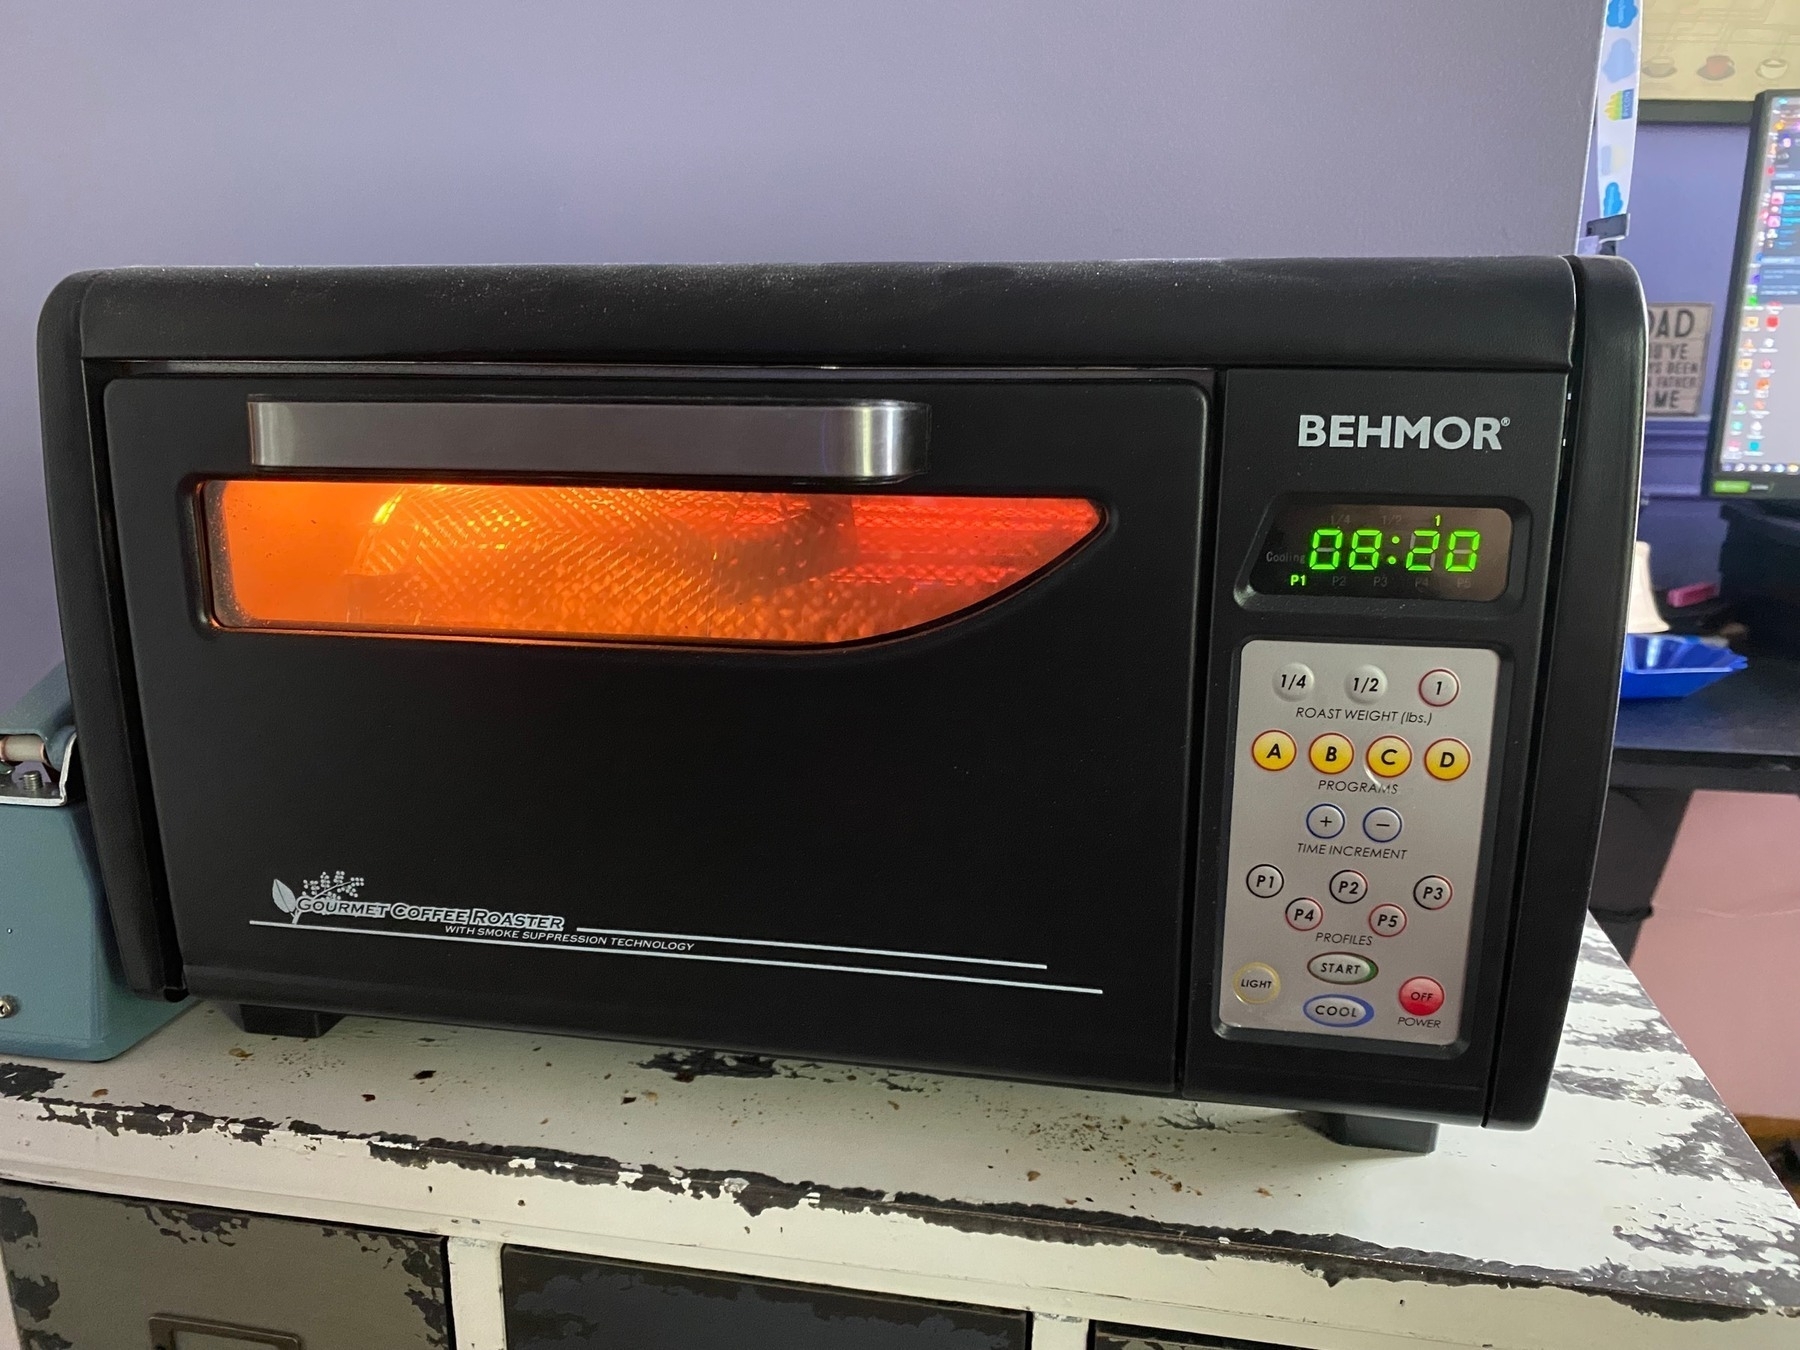 A Behmor drum roaster, glowing deep orange in the drum window where coffee beans slowly turn and roast.